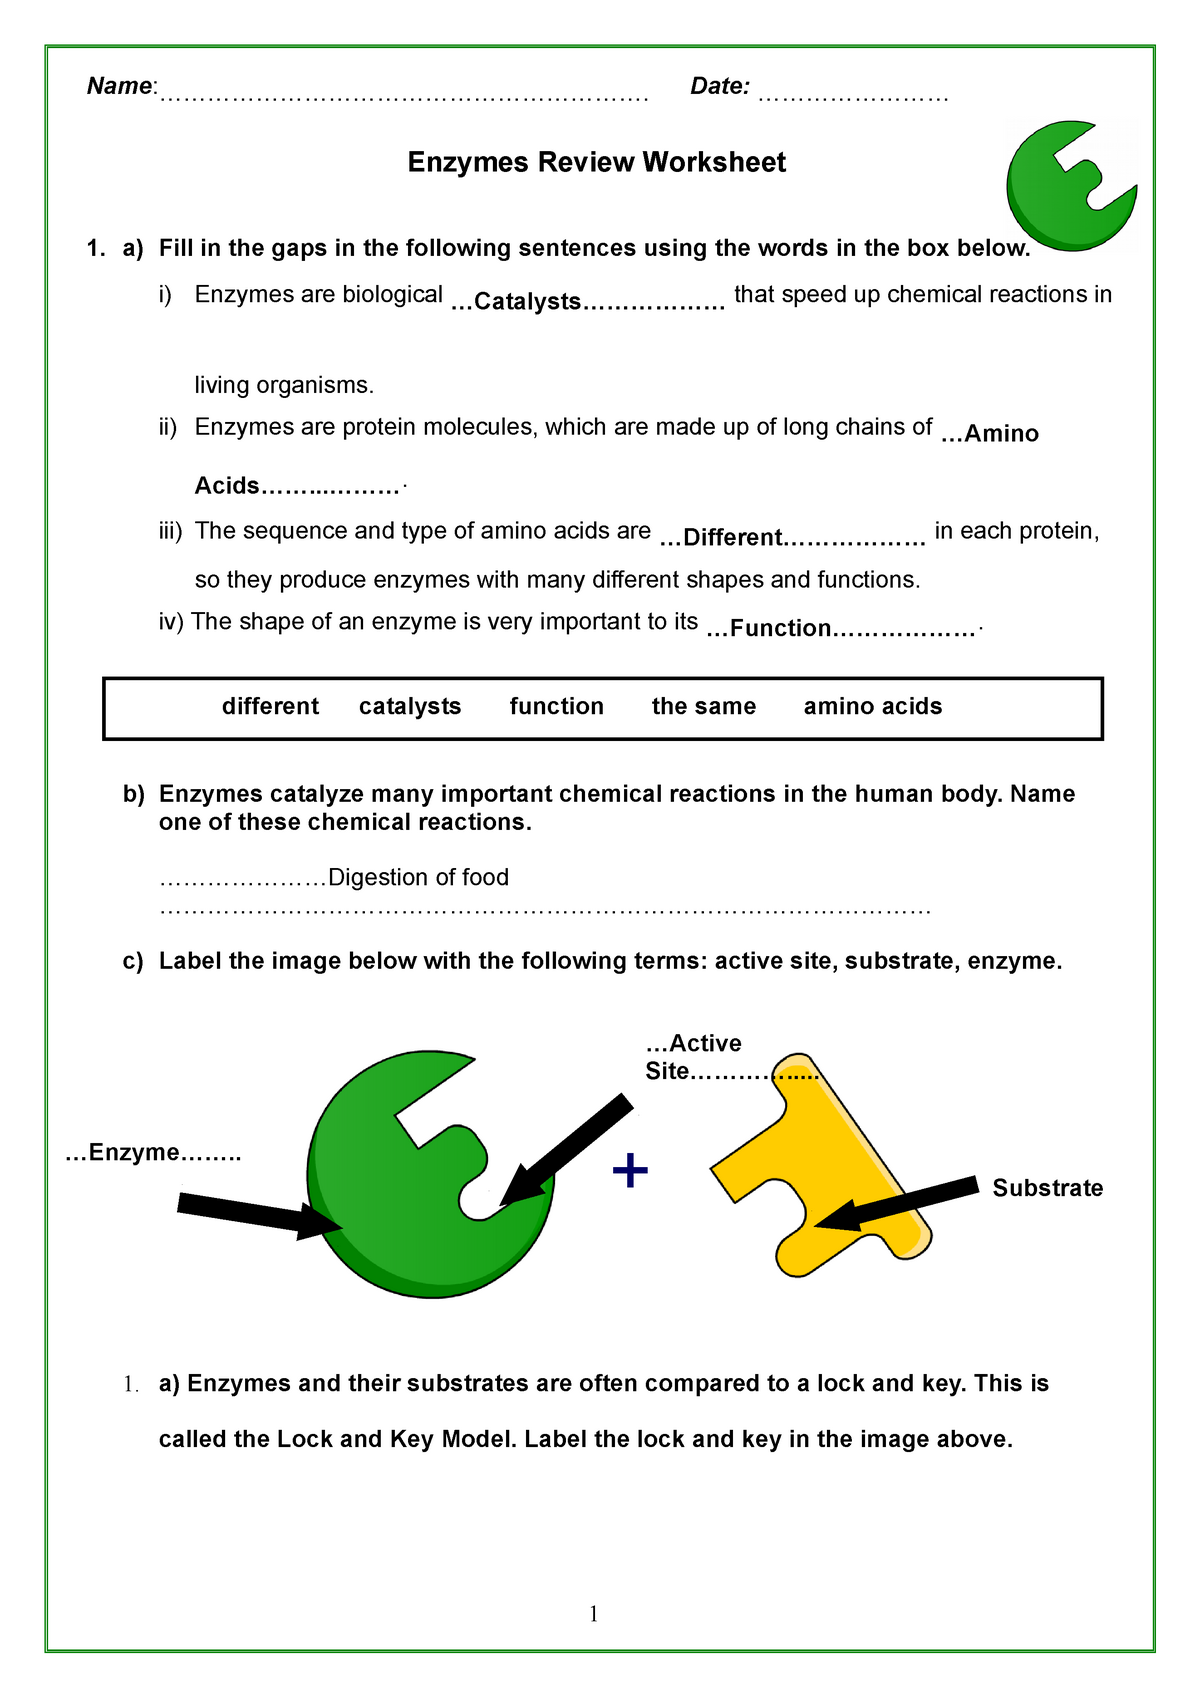 Enzymes review activity key - BLAW21 - Nursing - StuDocu With Enzyme Reactions Worksheet Answers